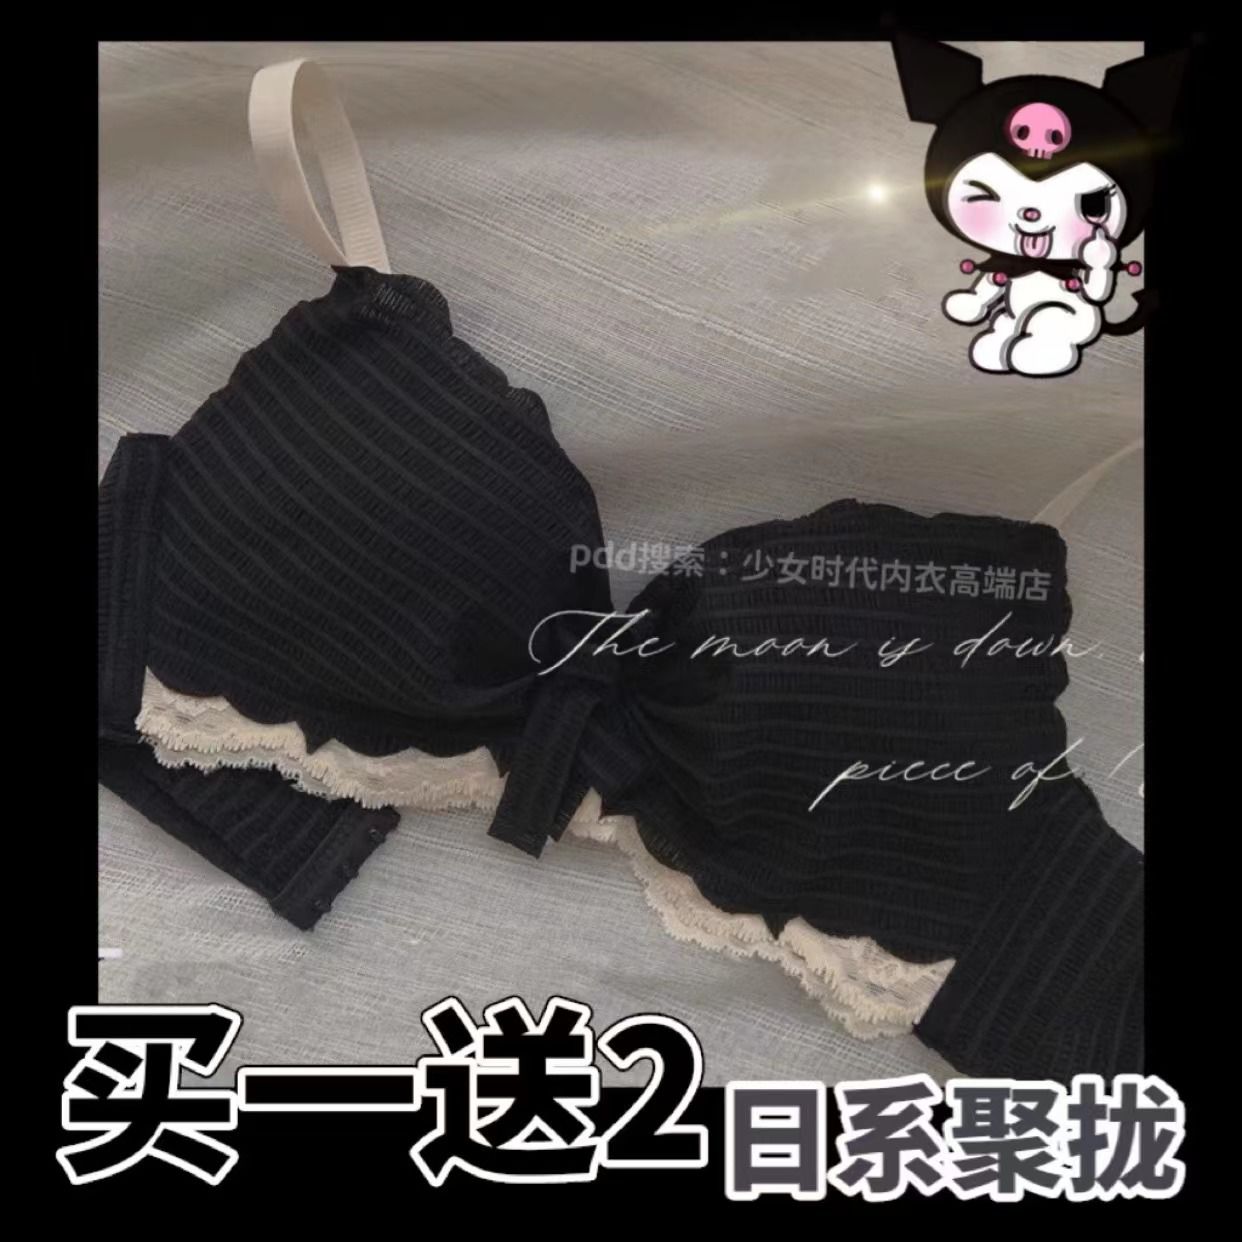 Underwear women's pure desire style Japanese girl small chest gathered anti-sagging adjustable bra without steel ring sexy thin bra